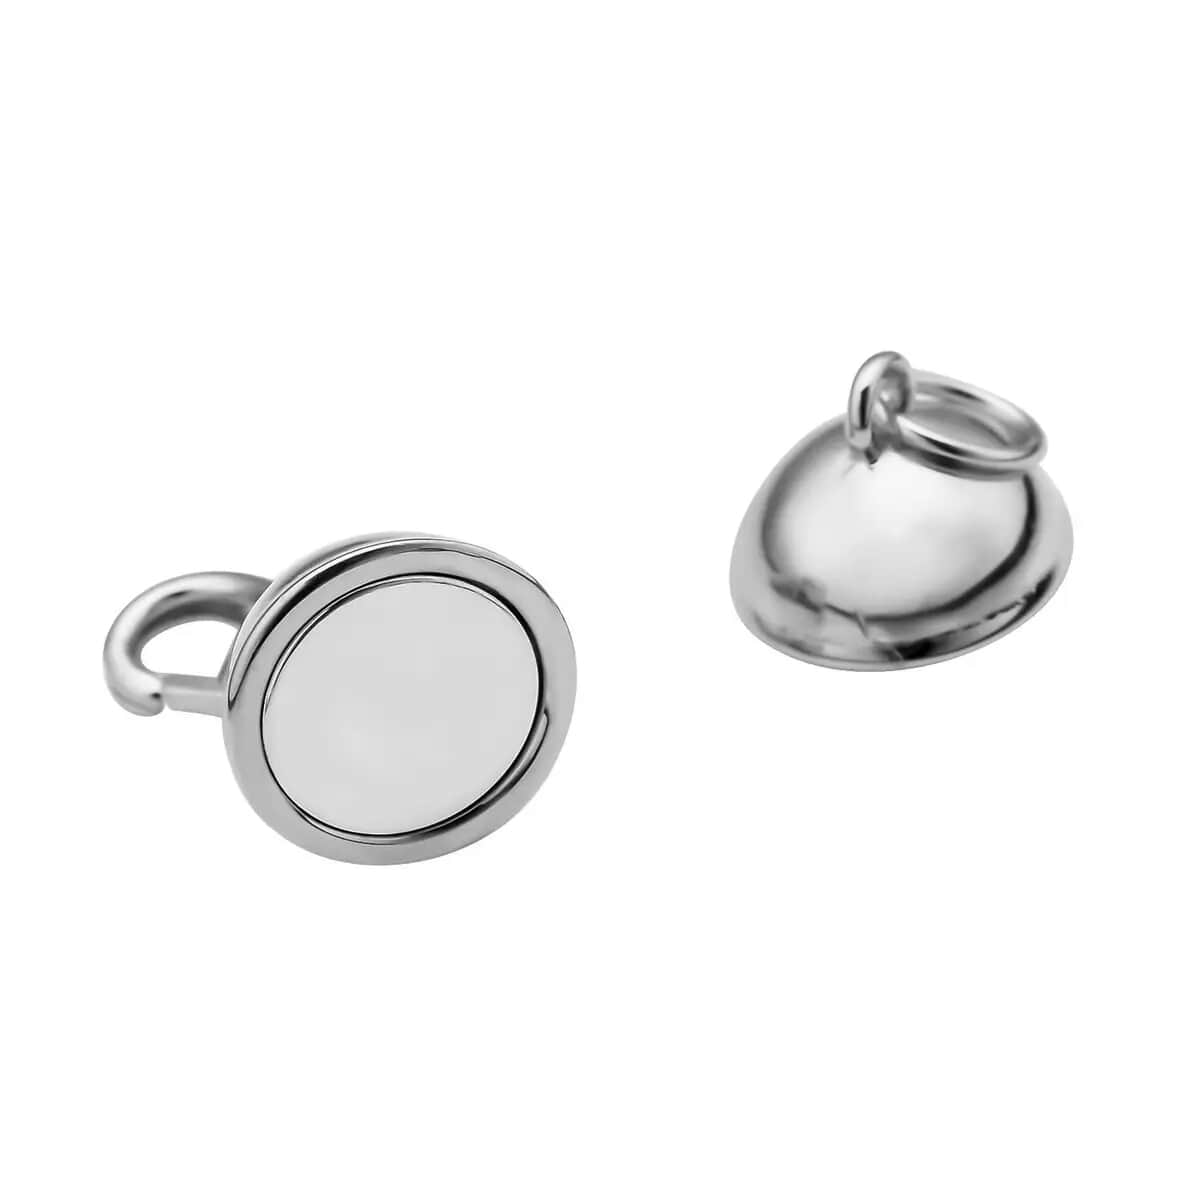 Rhodium Over Sterling Silver Magnetic Lock, Jewelry Lock with Lobster Clasp, Silver Jewelry Clasp, Round Magnetic Lock in Silver 2.50 Grams (Del. in 5-7 Days) image number 5